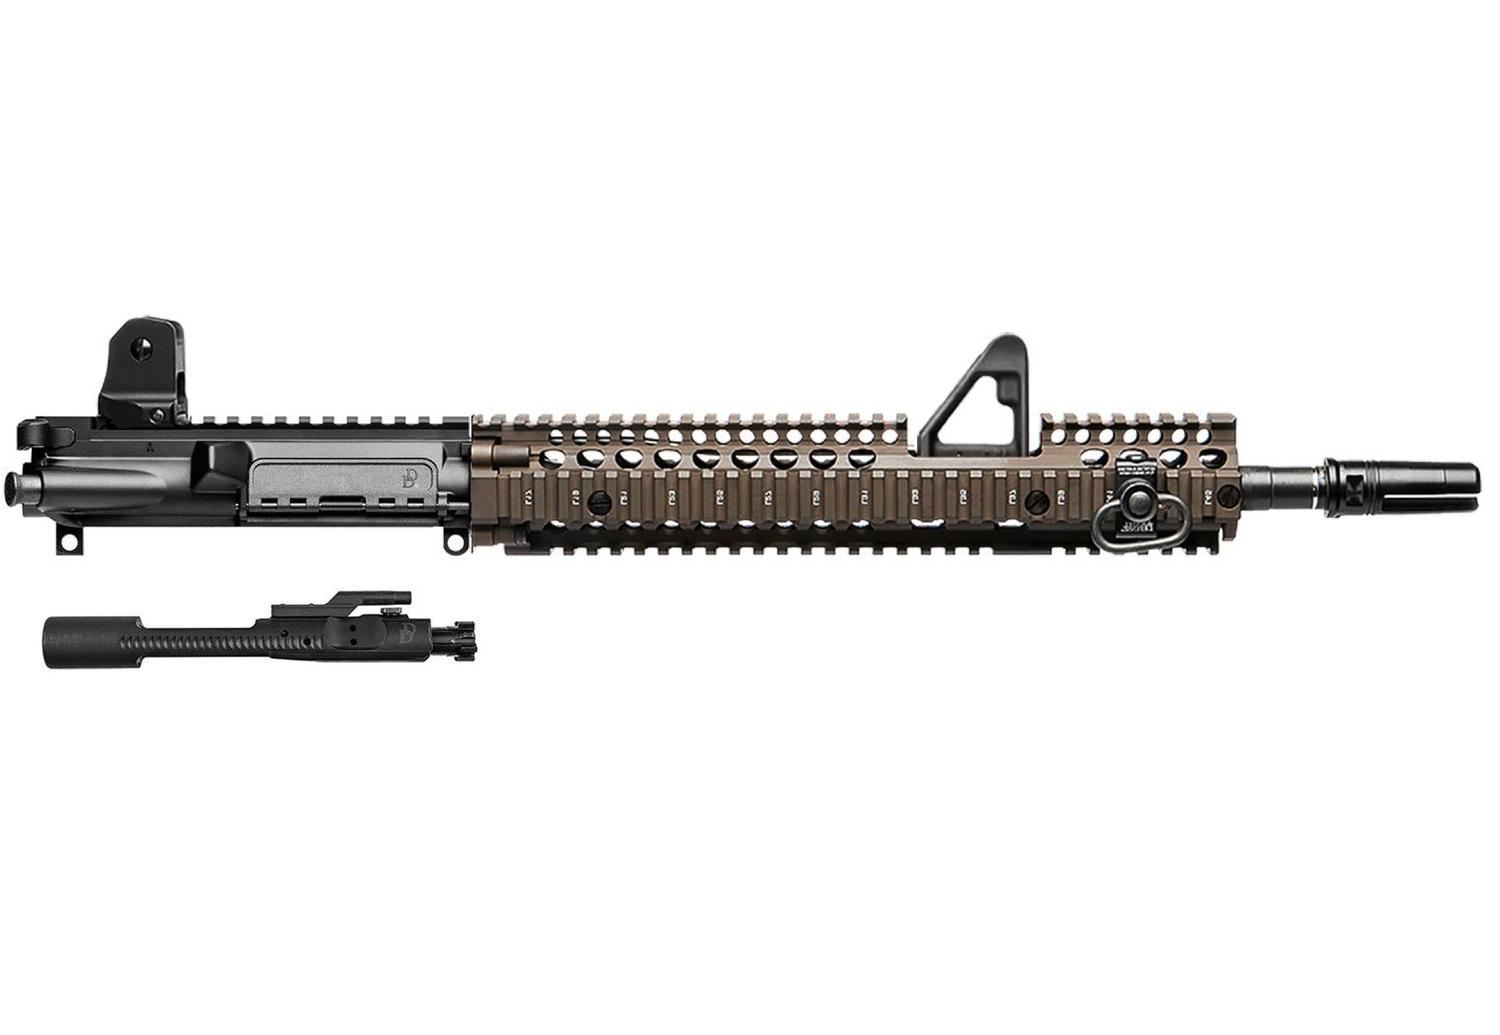  M4a1 Fsp Complete Upper Receiver Group